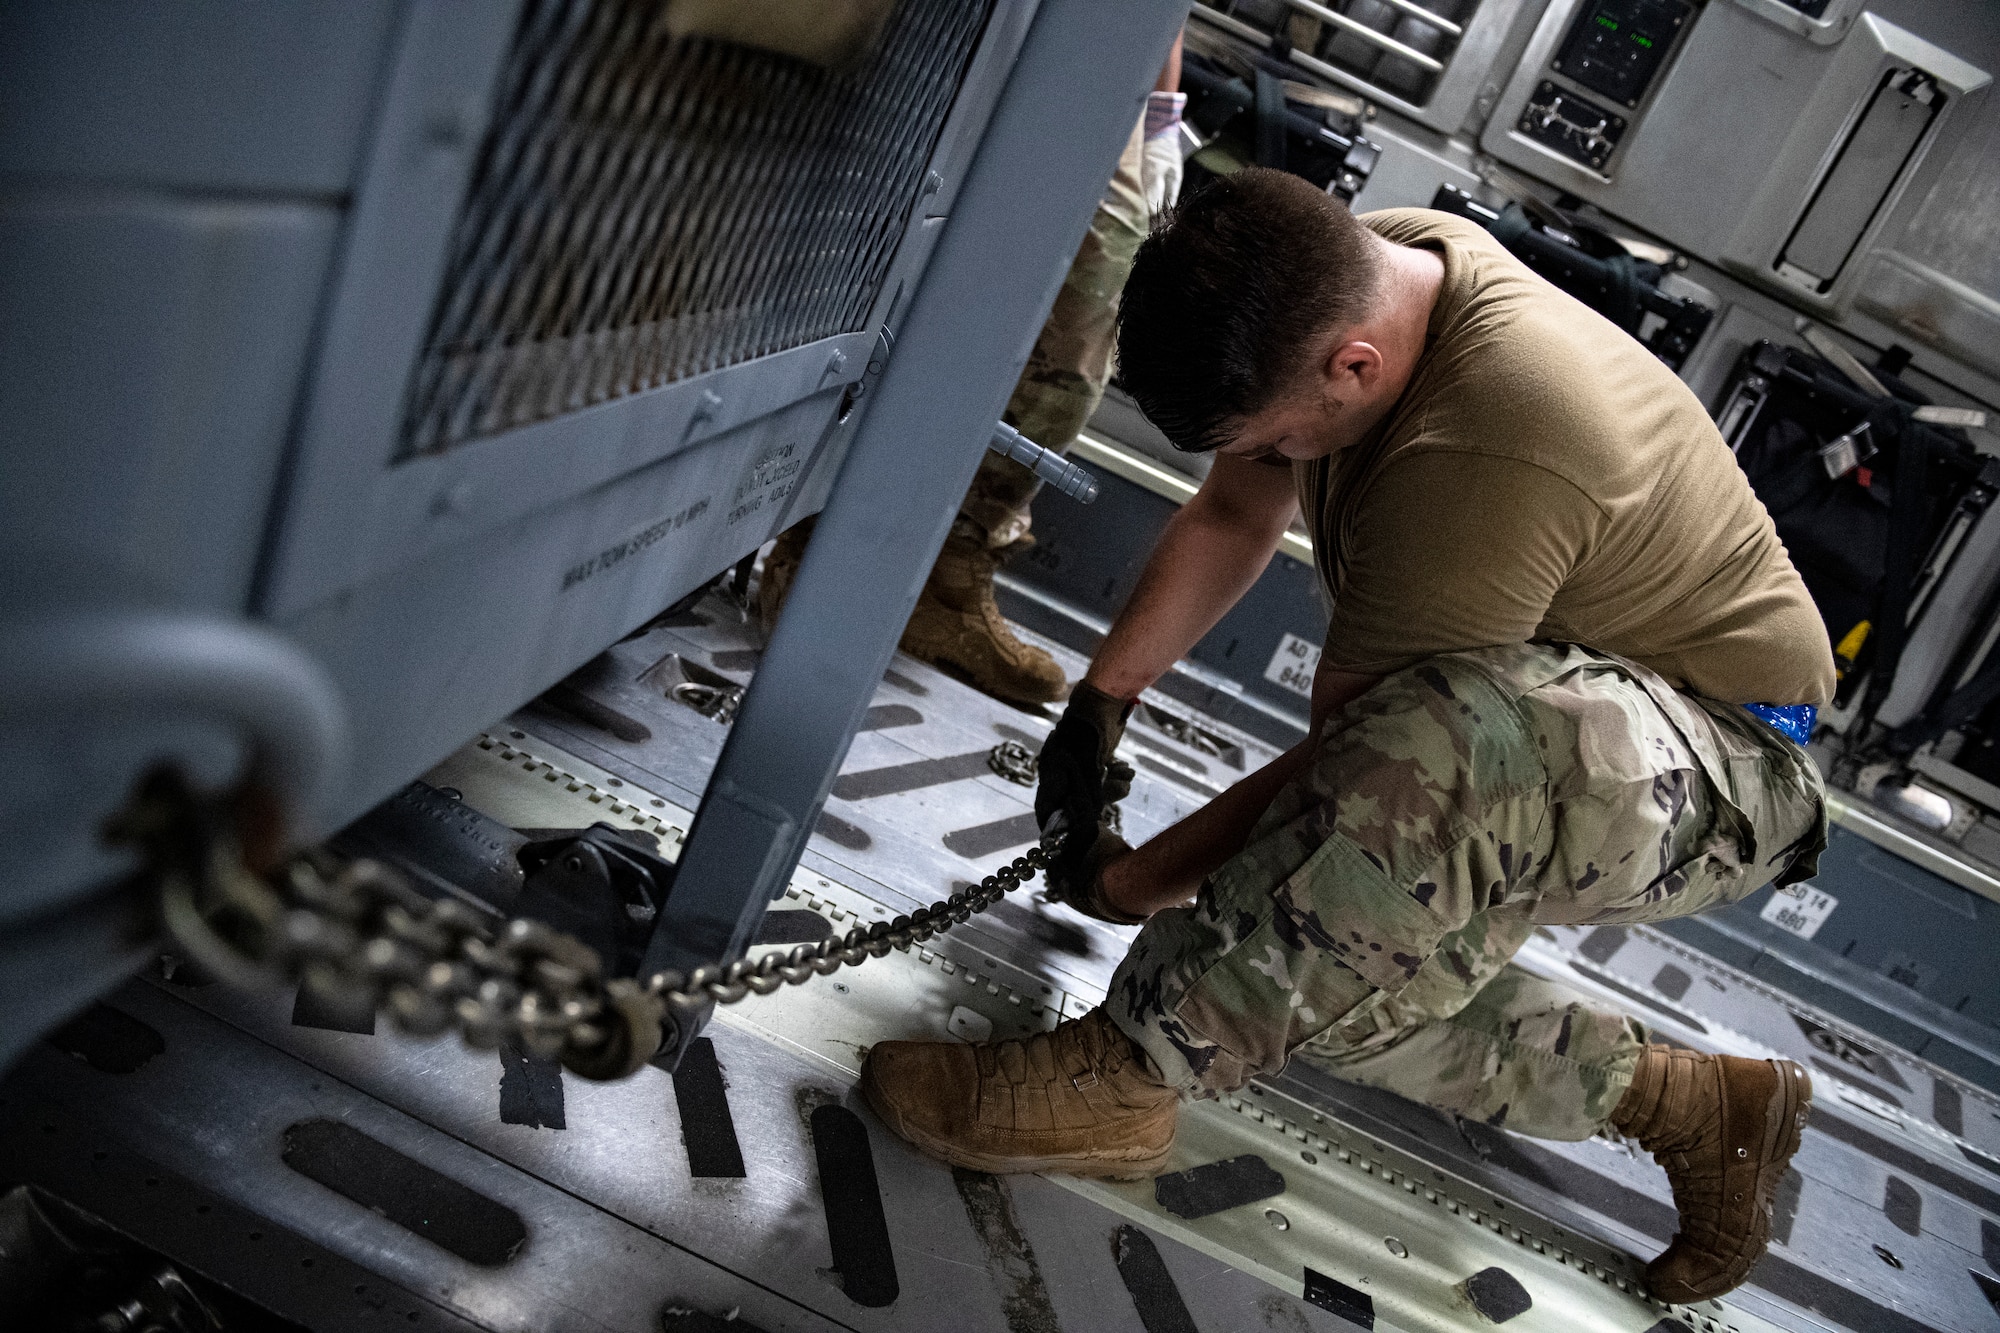 Photo of Airman loading equipment onto an aircraft